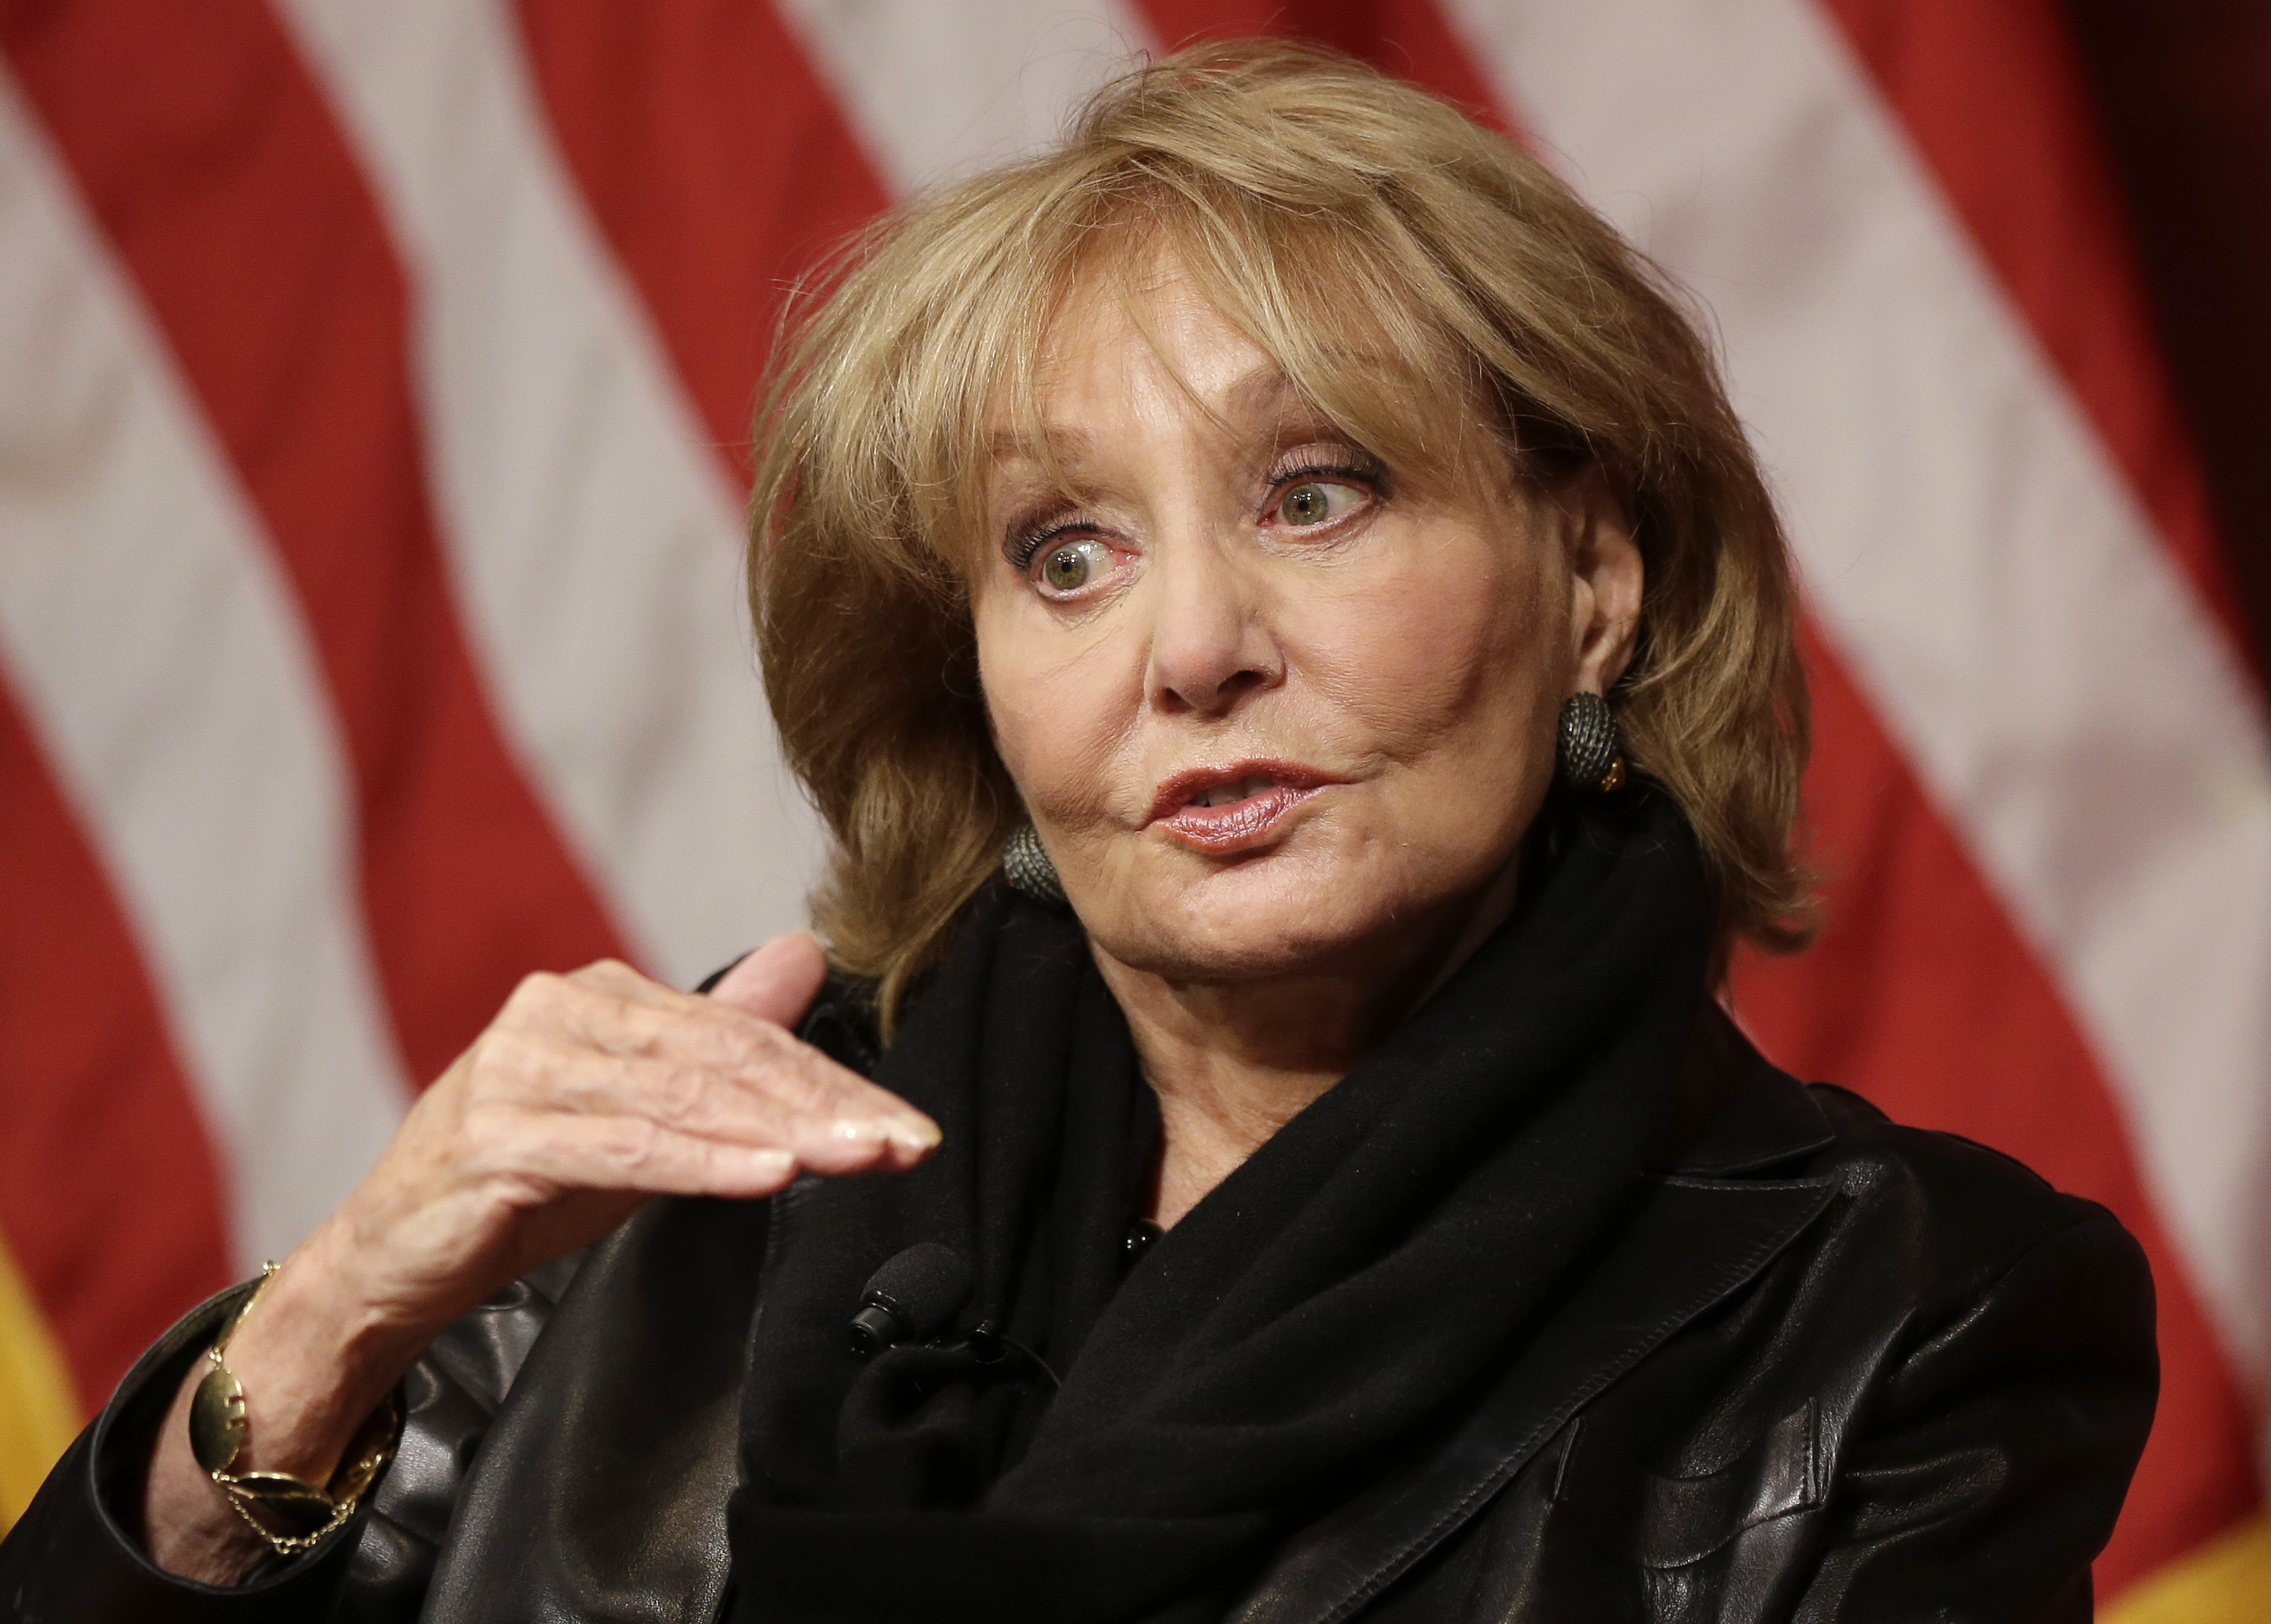 Barbara walters trailblazing news anchor with legendary drive for the big get dead at